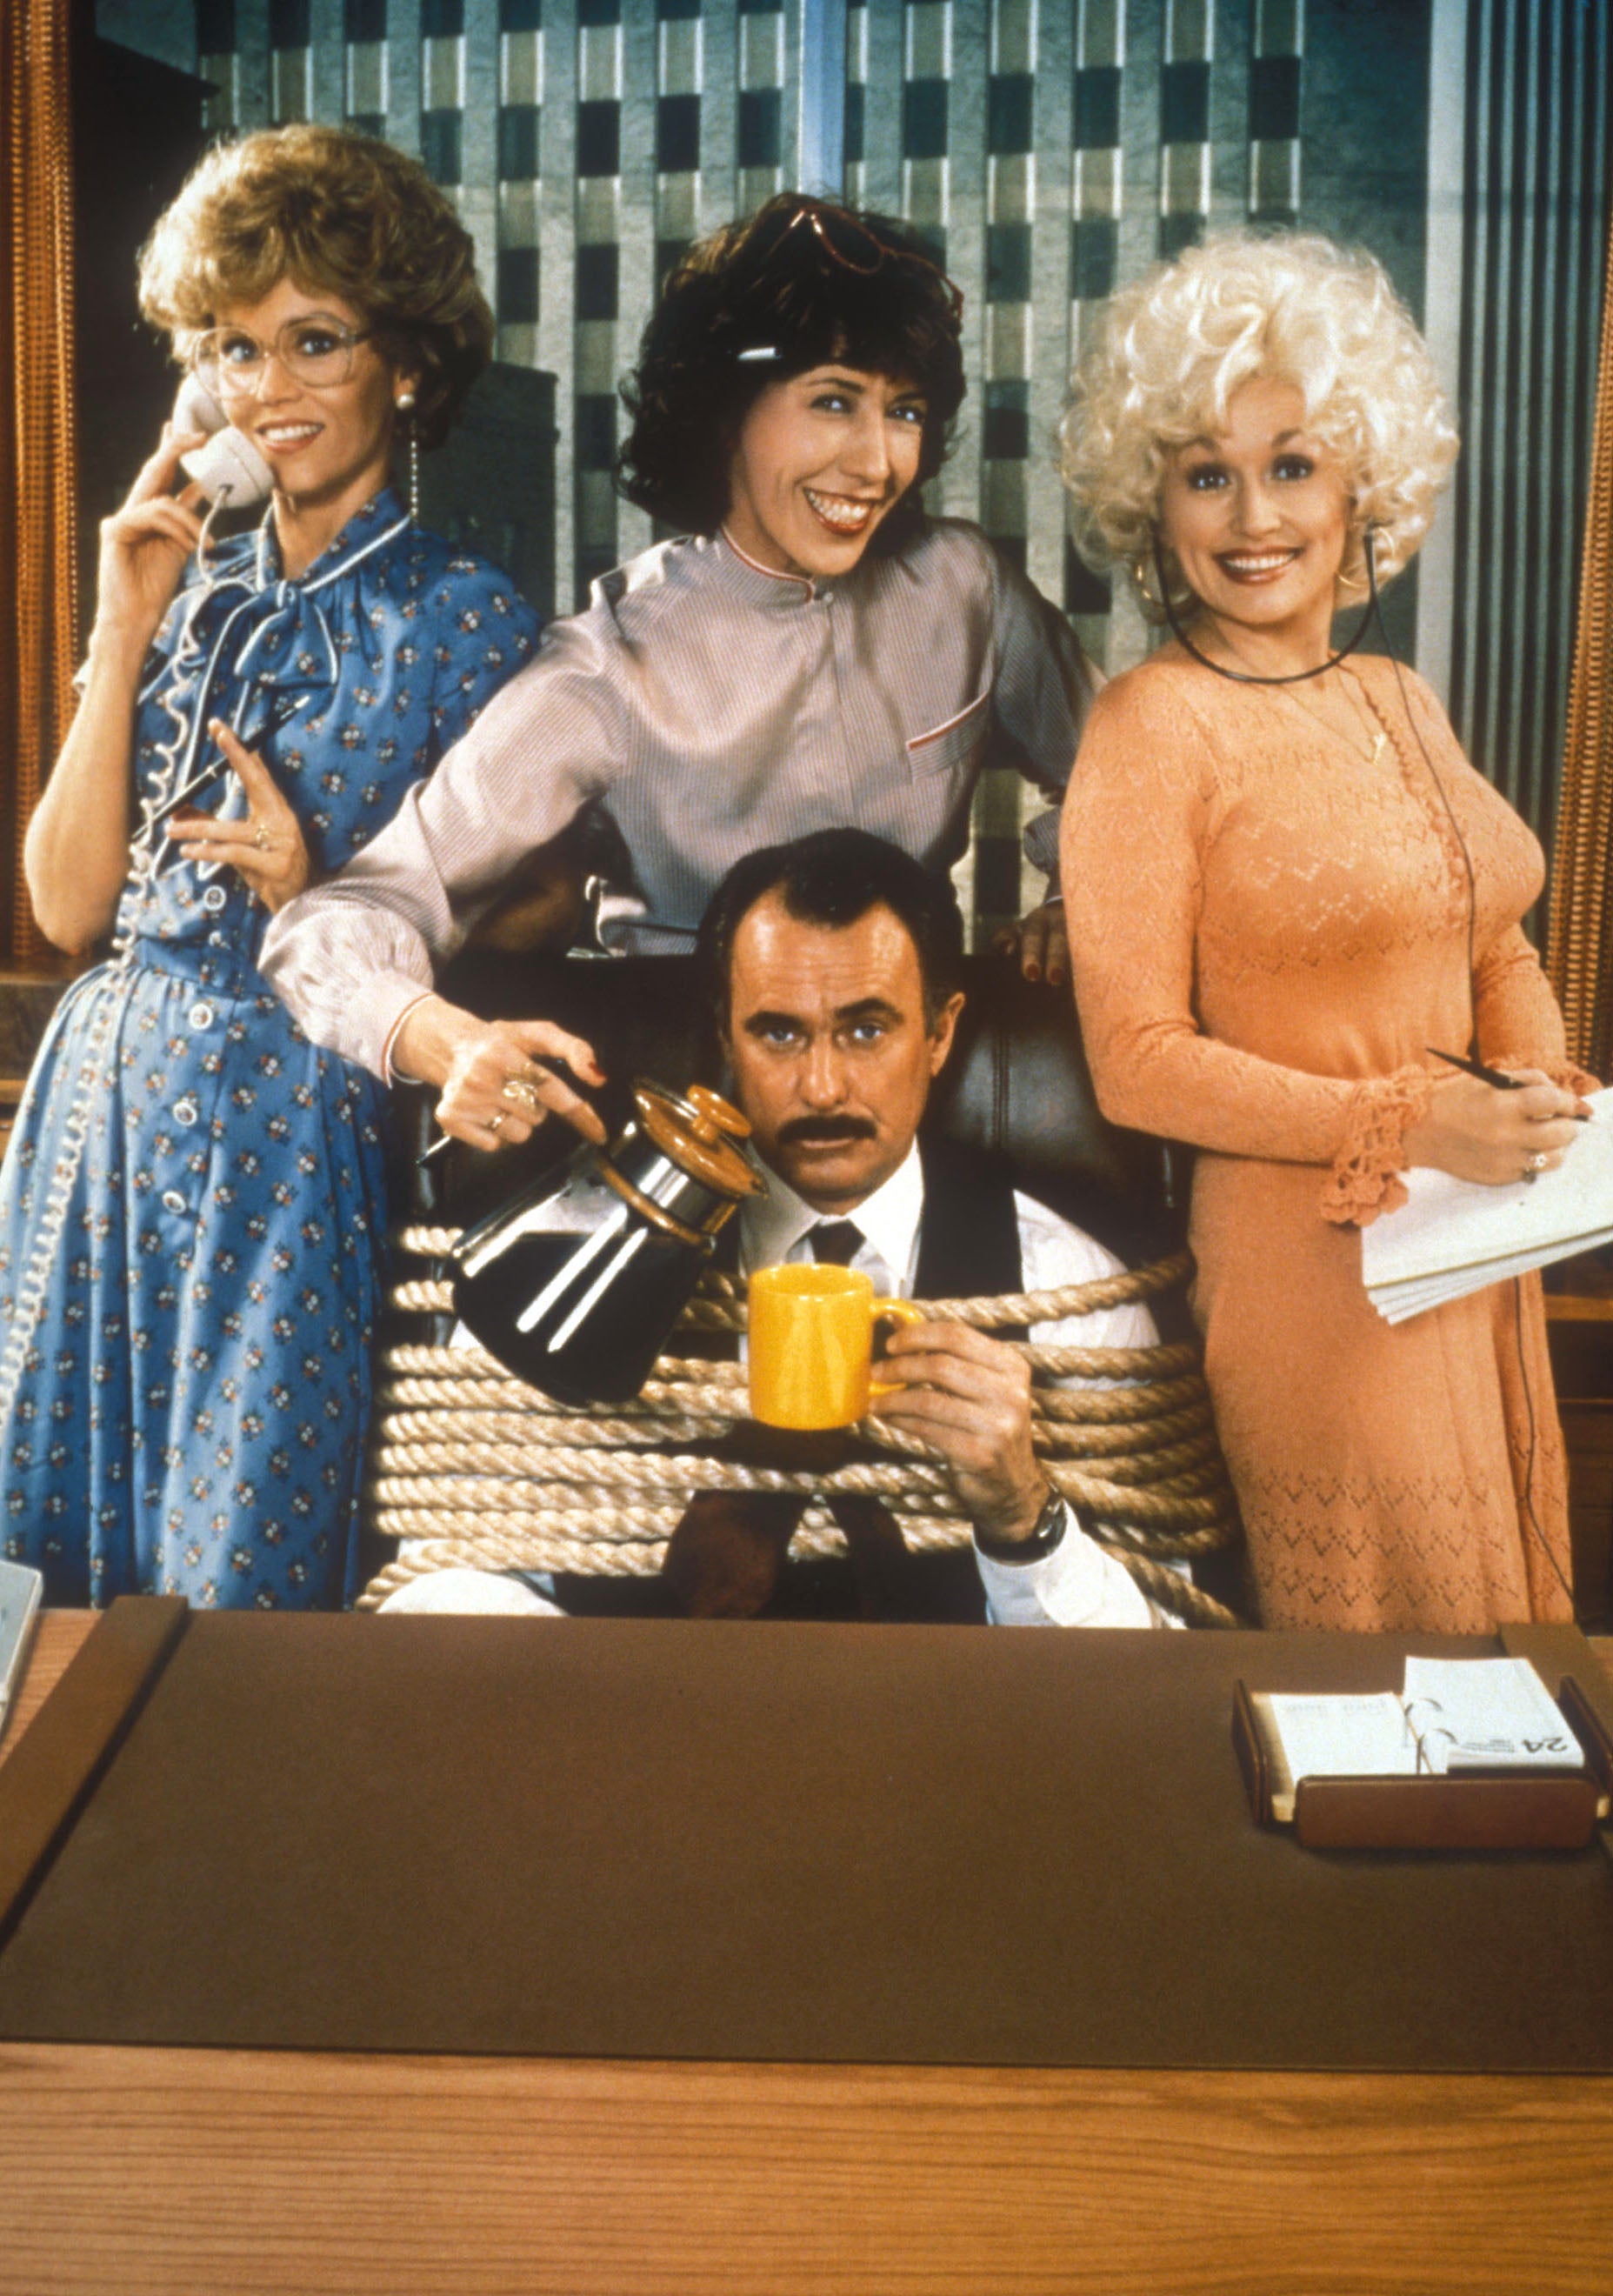 Parton and her ‘Nine to Five’ co-stars Jane Fonda, Lily Tomlin and Dabney Coleman